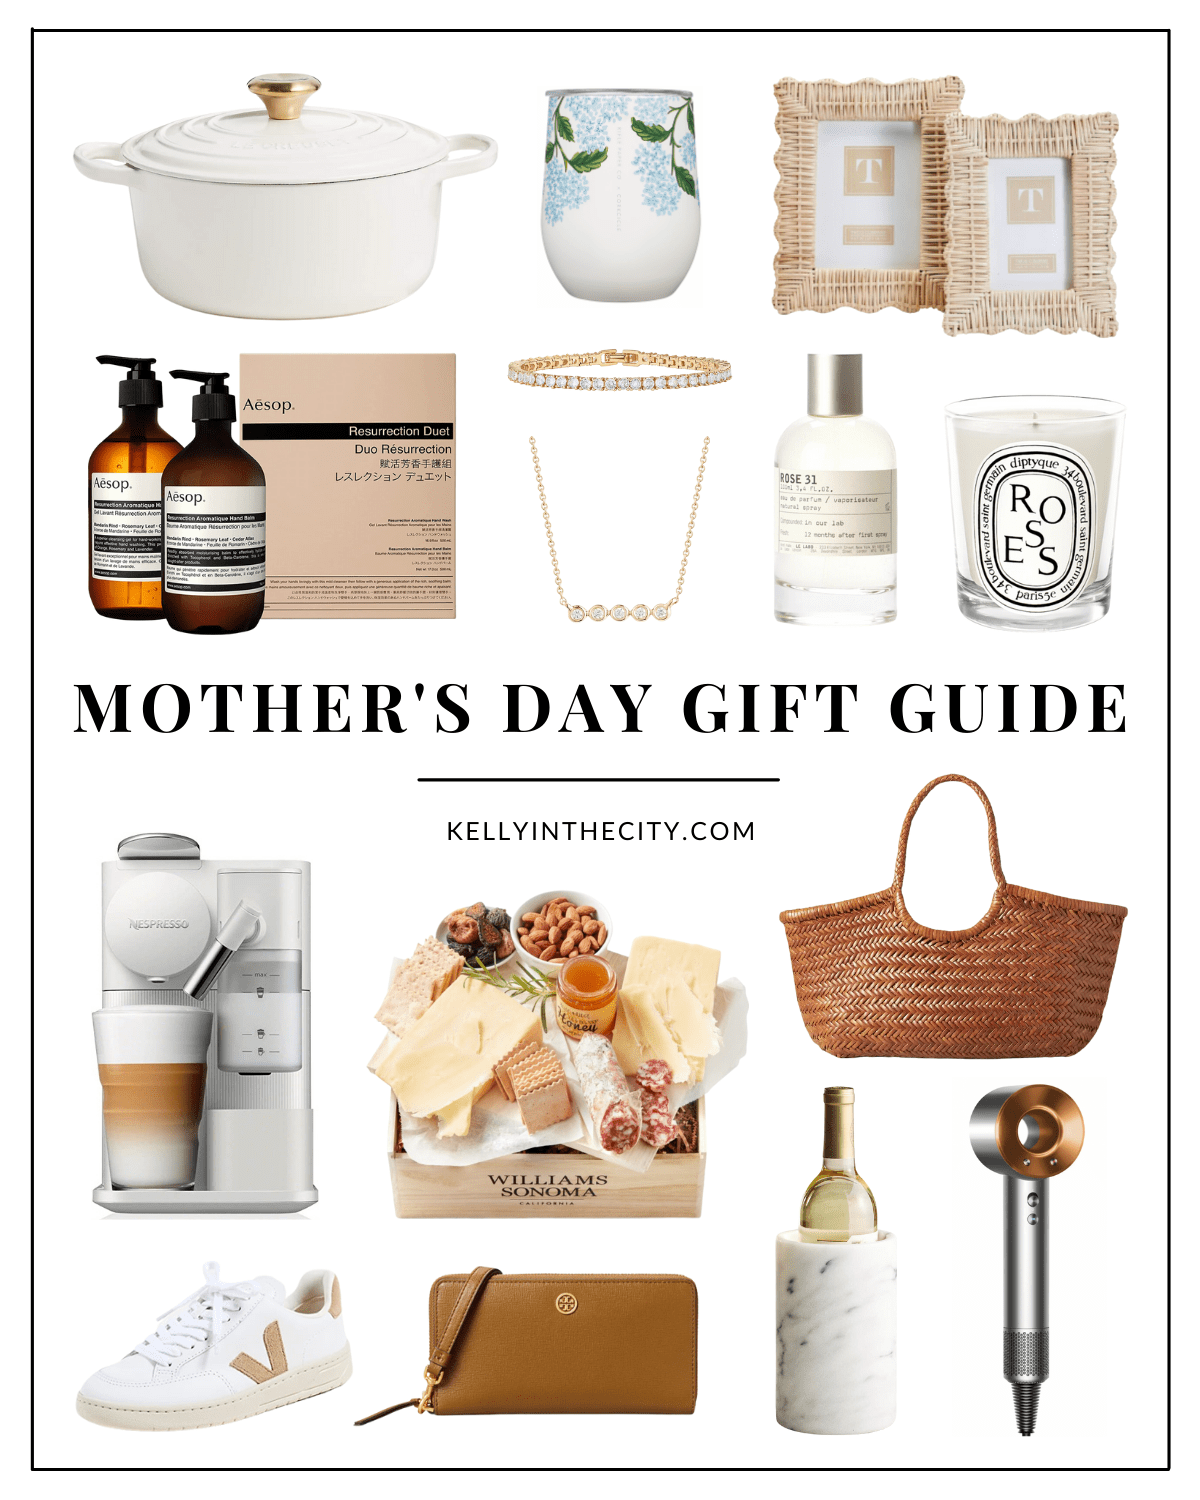 Mother's Day Gifts - Kelly in the City